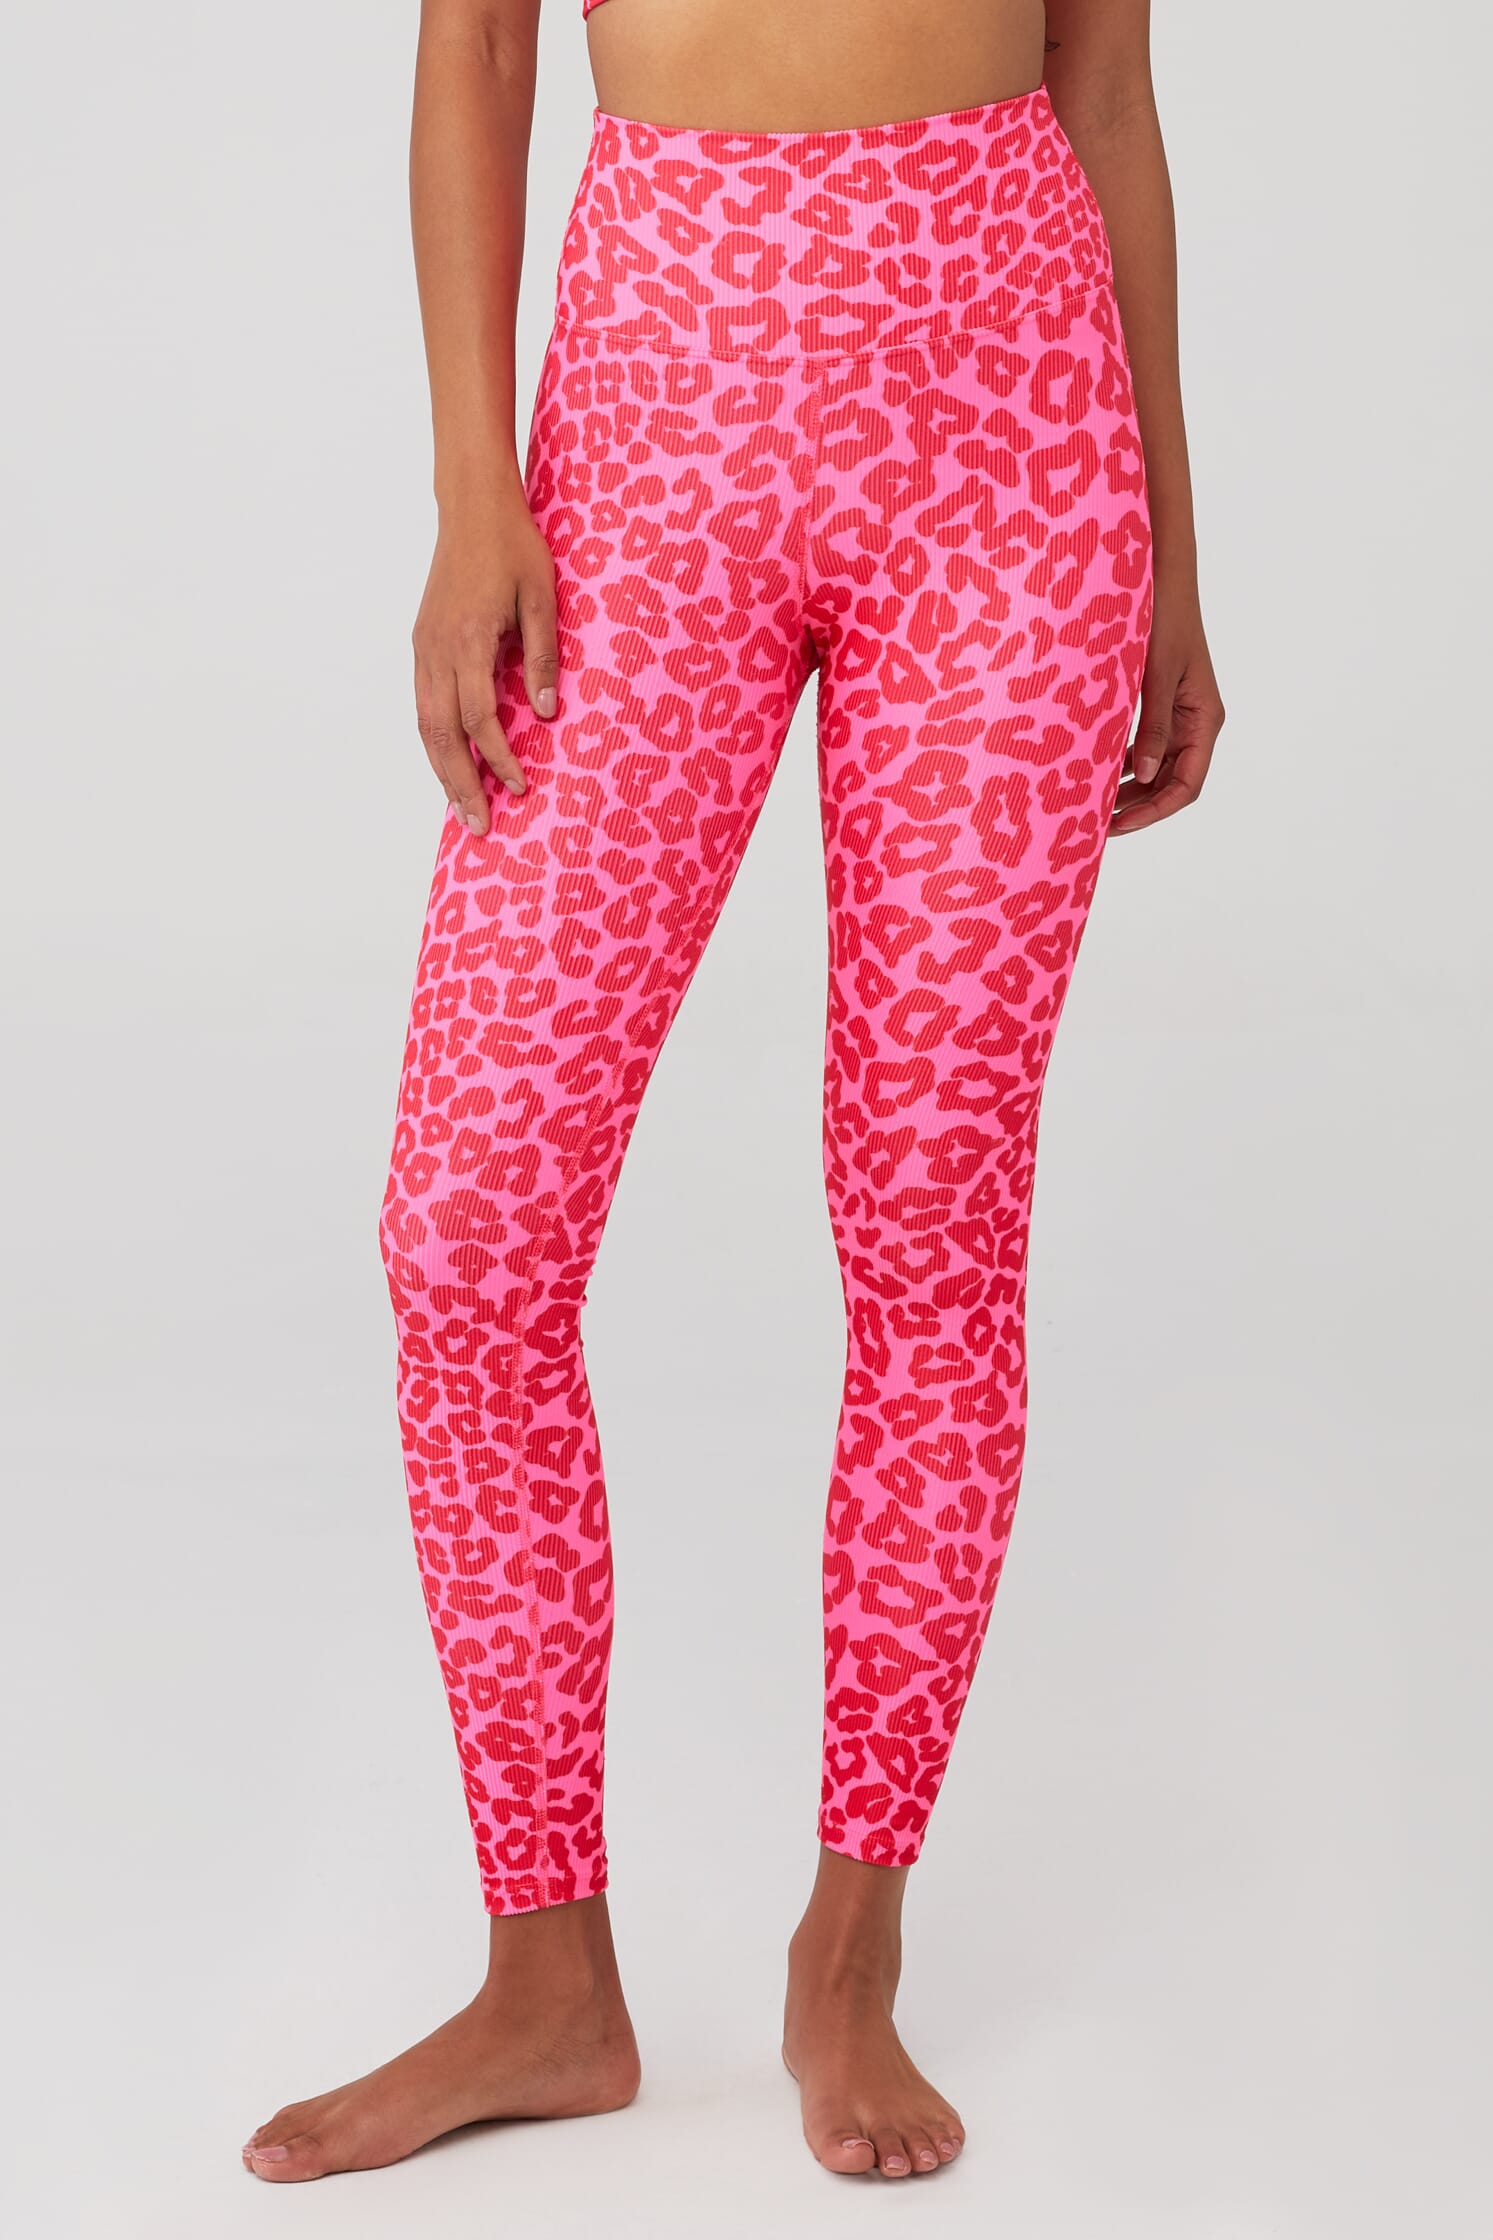 https://images.fashionpass.com/products/ayla-legging-beach-riot-love-leopard-552-1.jpg?profile=a